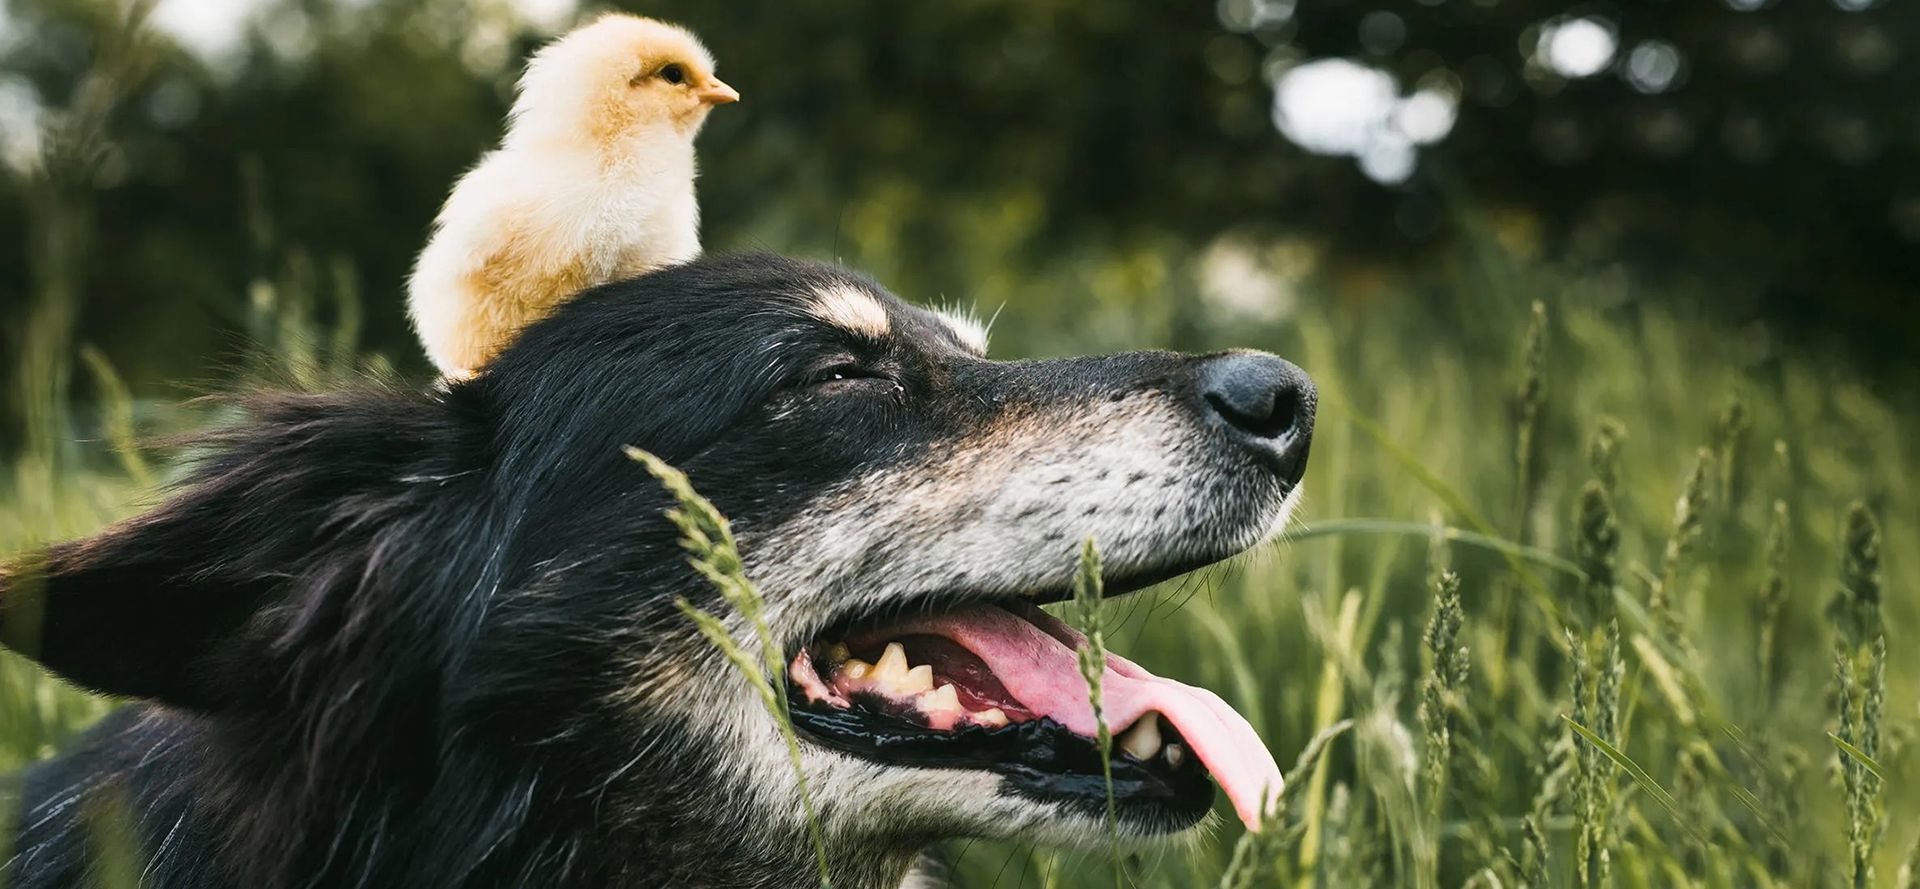 Dog and chickens on its head.